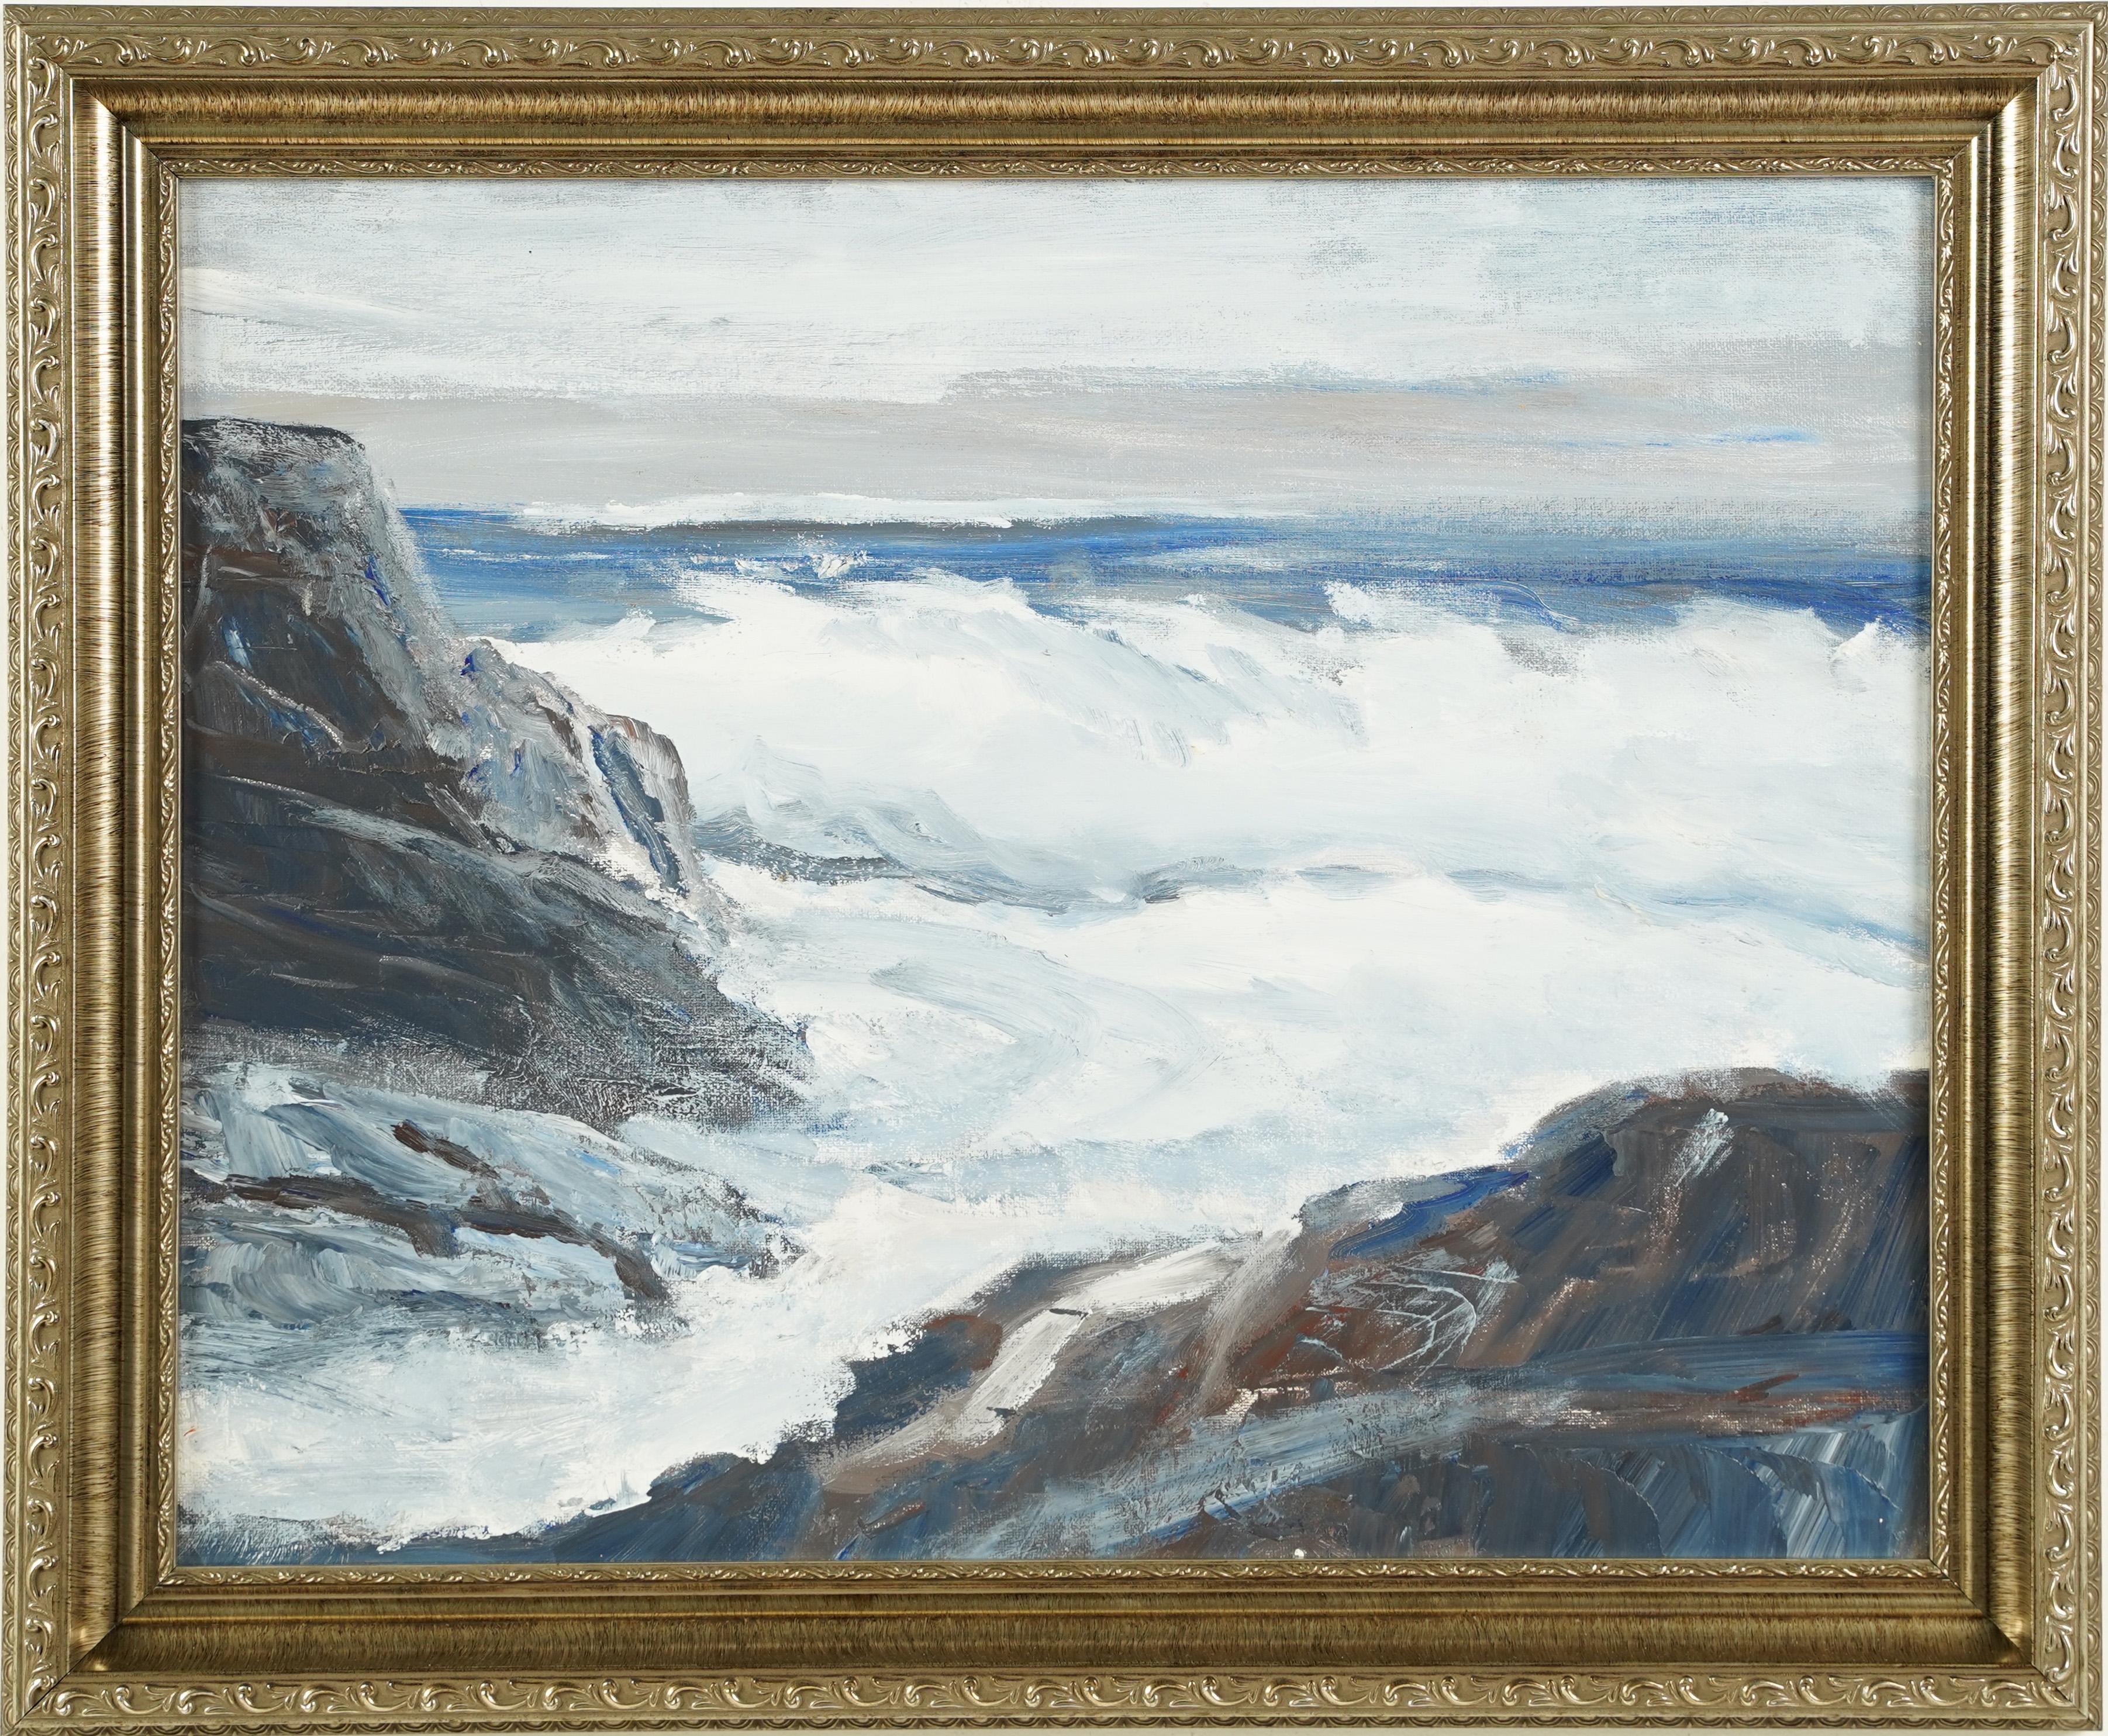  Antique American School Rough Surf Coastal Seascape Beach Framed Oil Painting - Gray Landscape Painting by Unknown